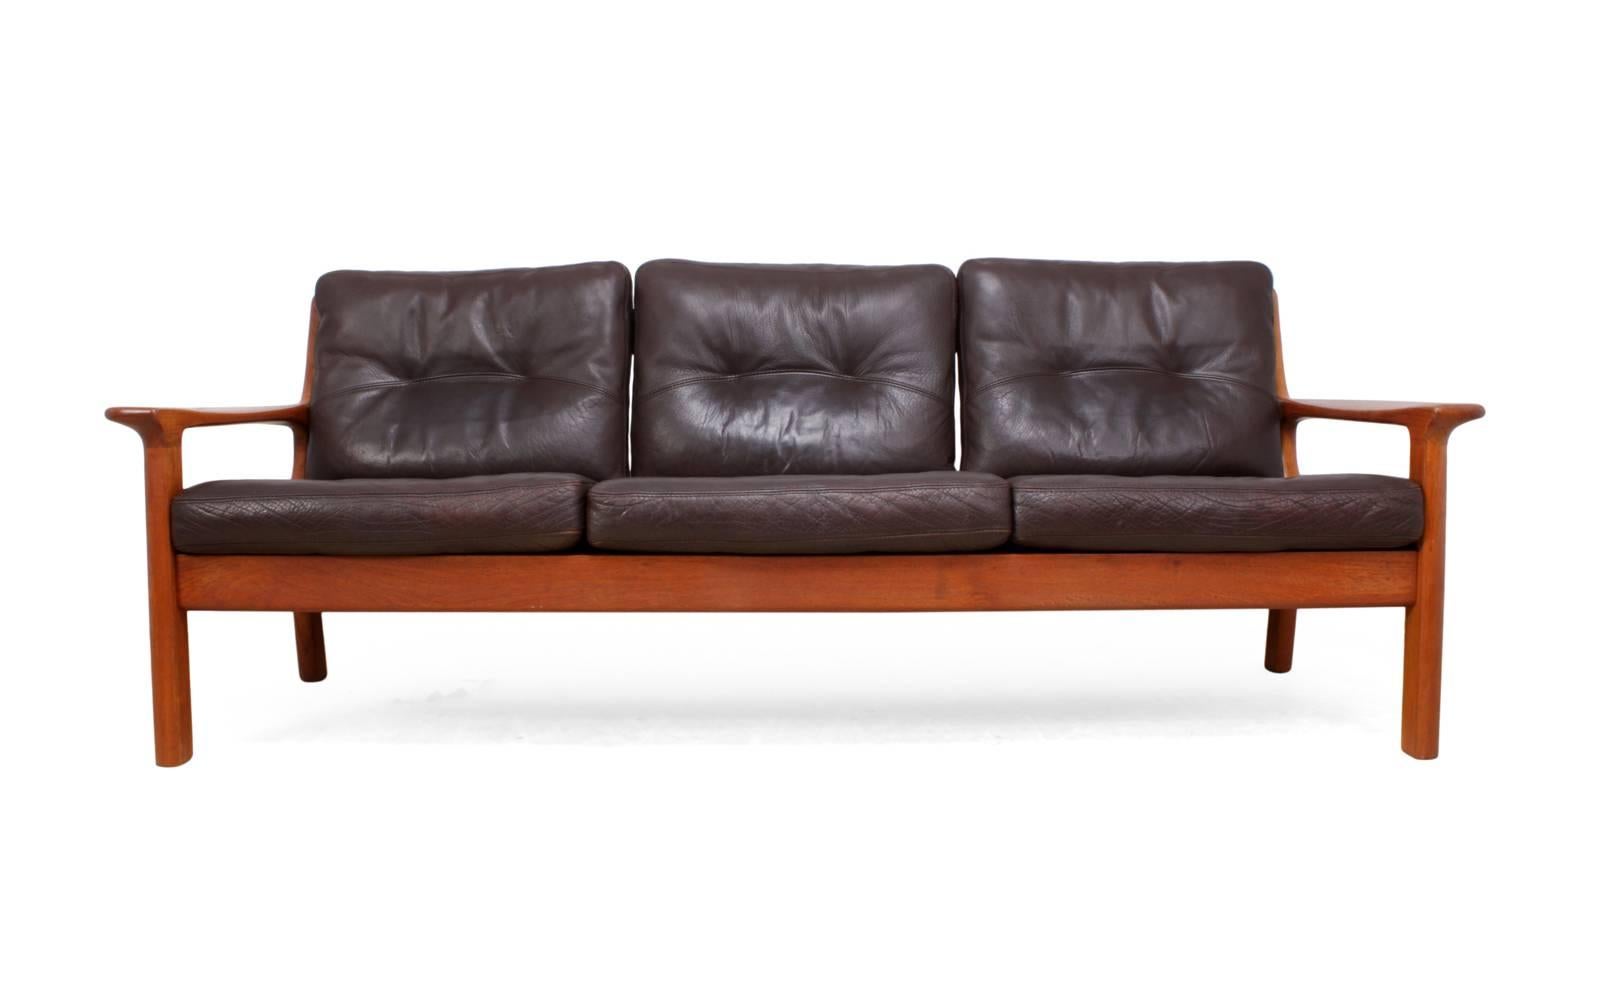 Mid-20th Century Midcentury Sofa in Teak and Leather by Glostrop